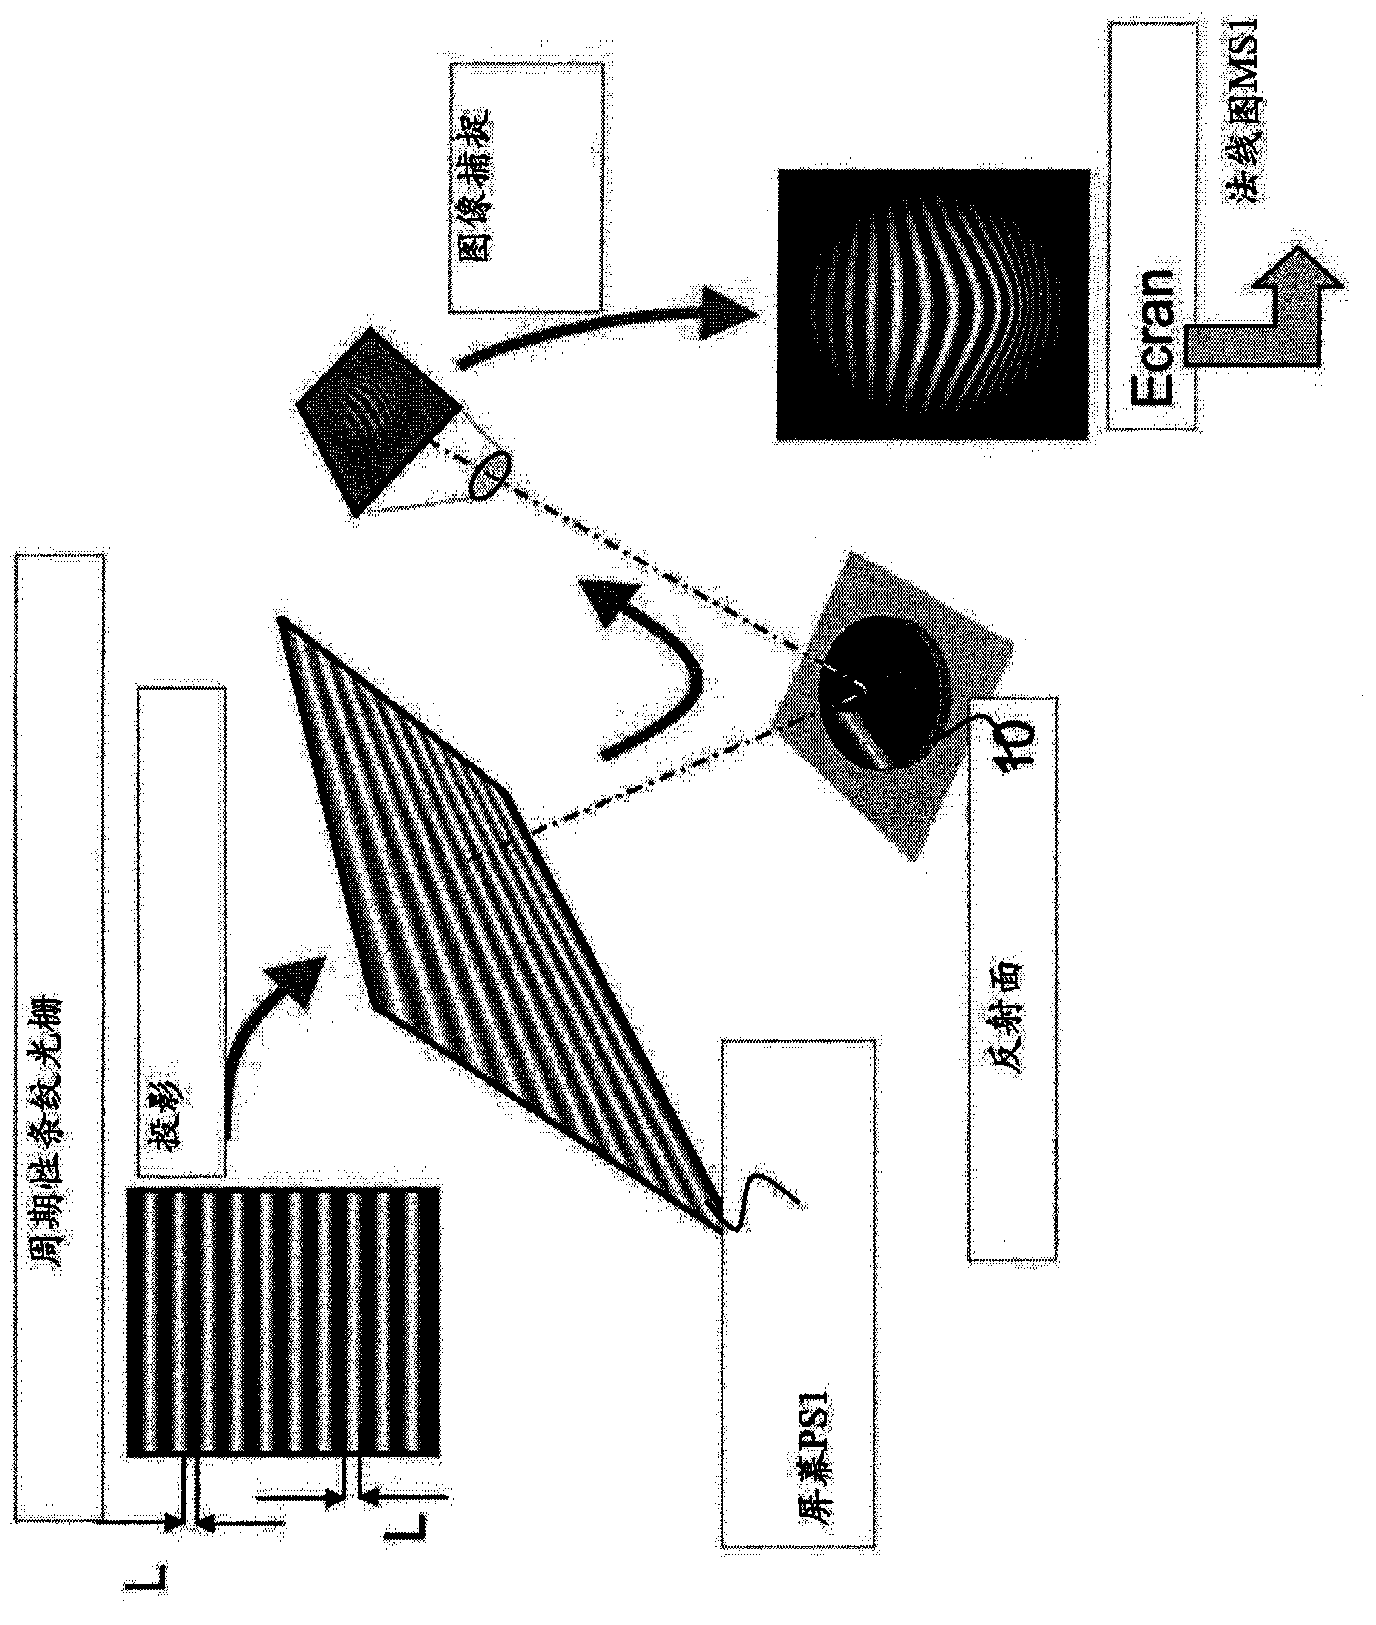 Method and system for measuring the geometric or optical structure of an optical component